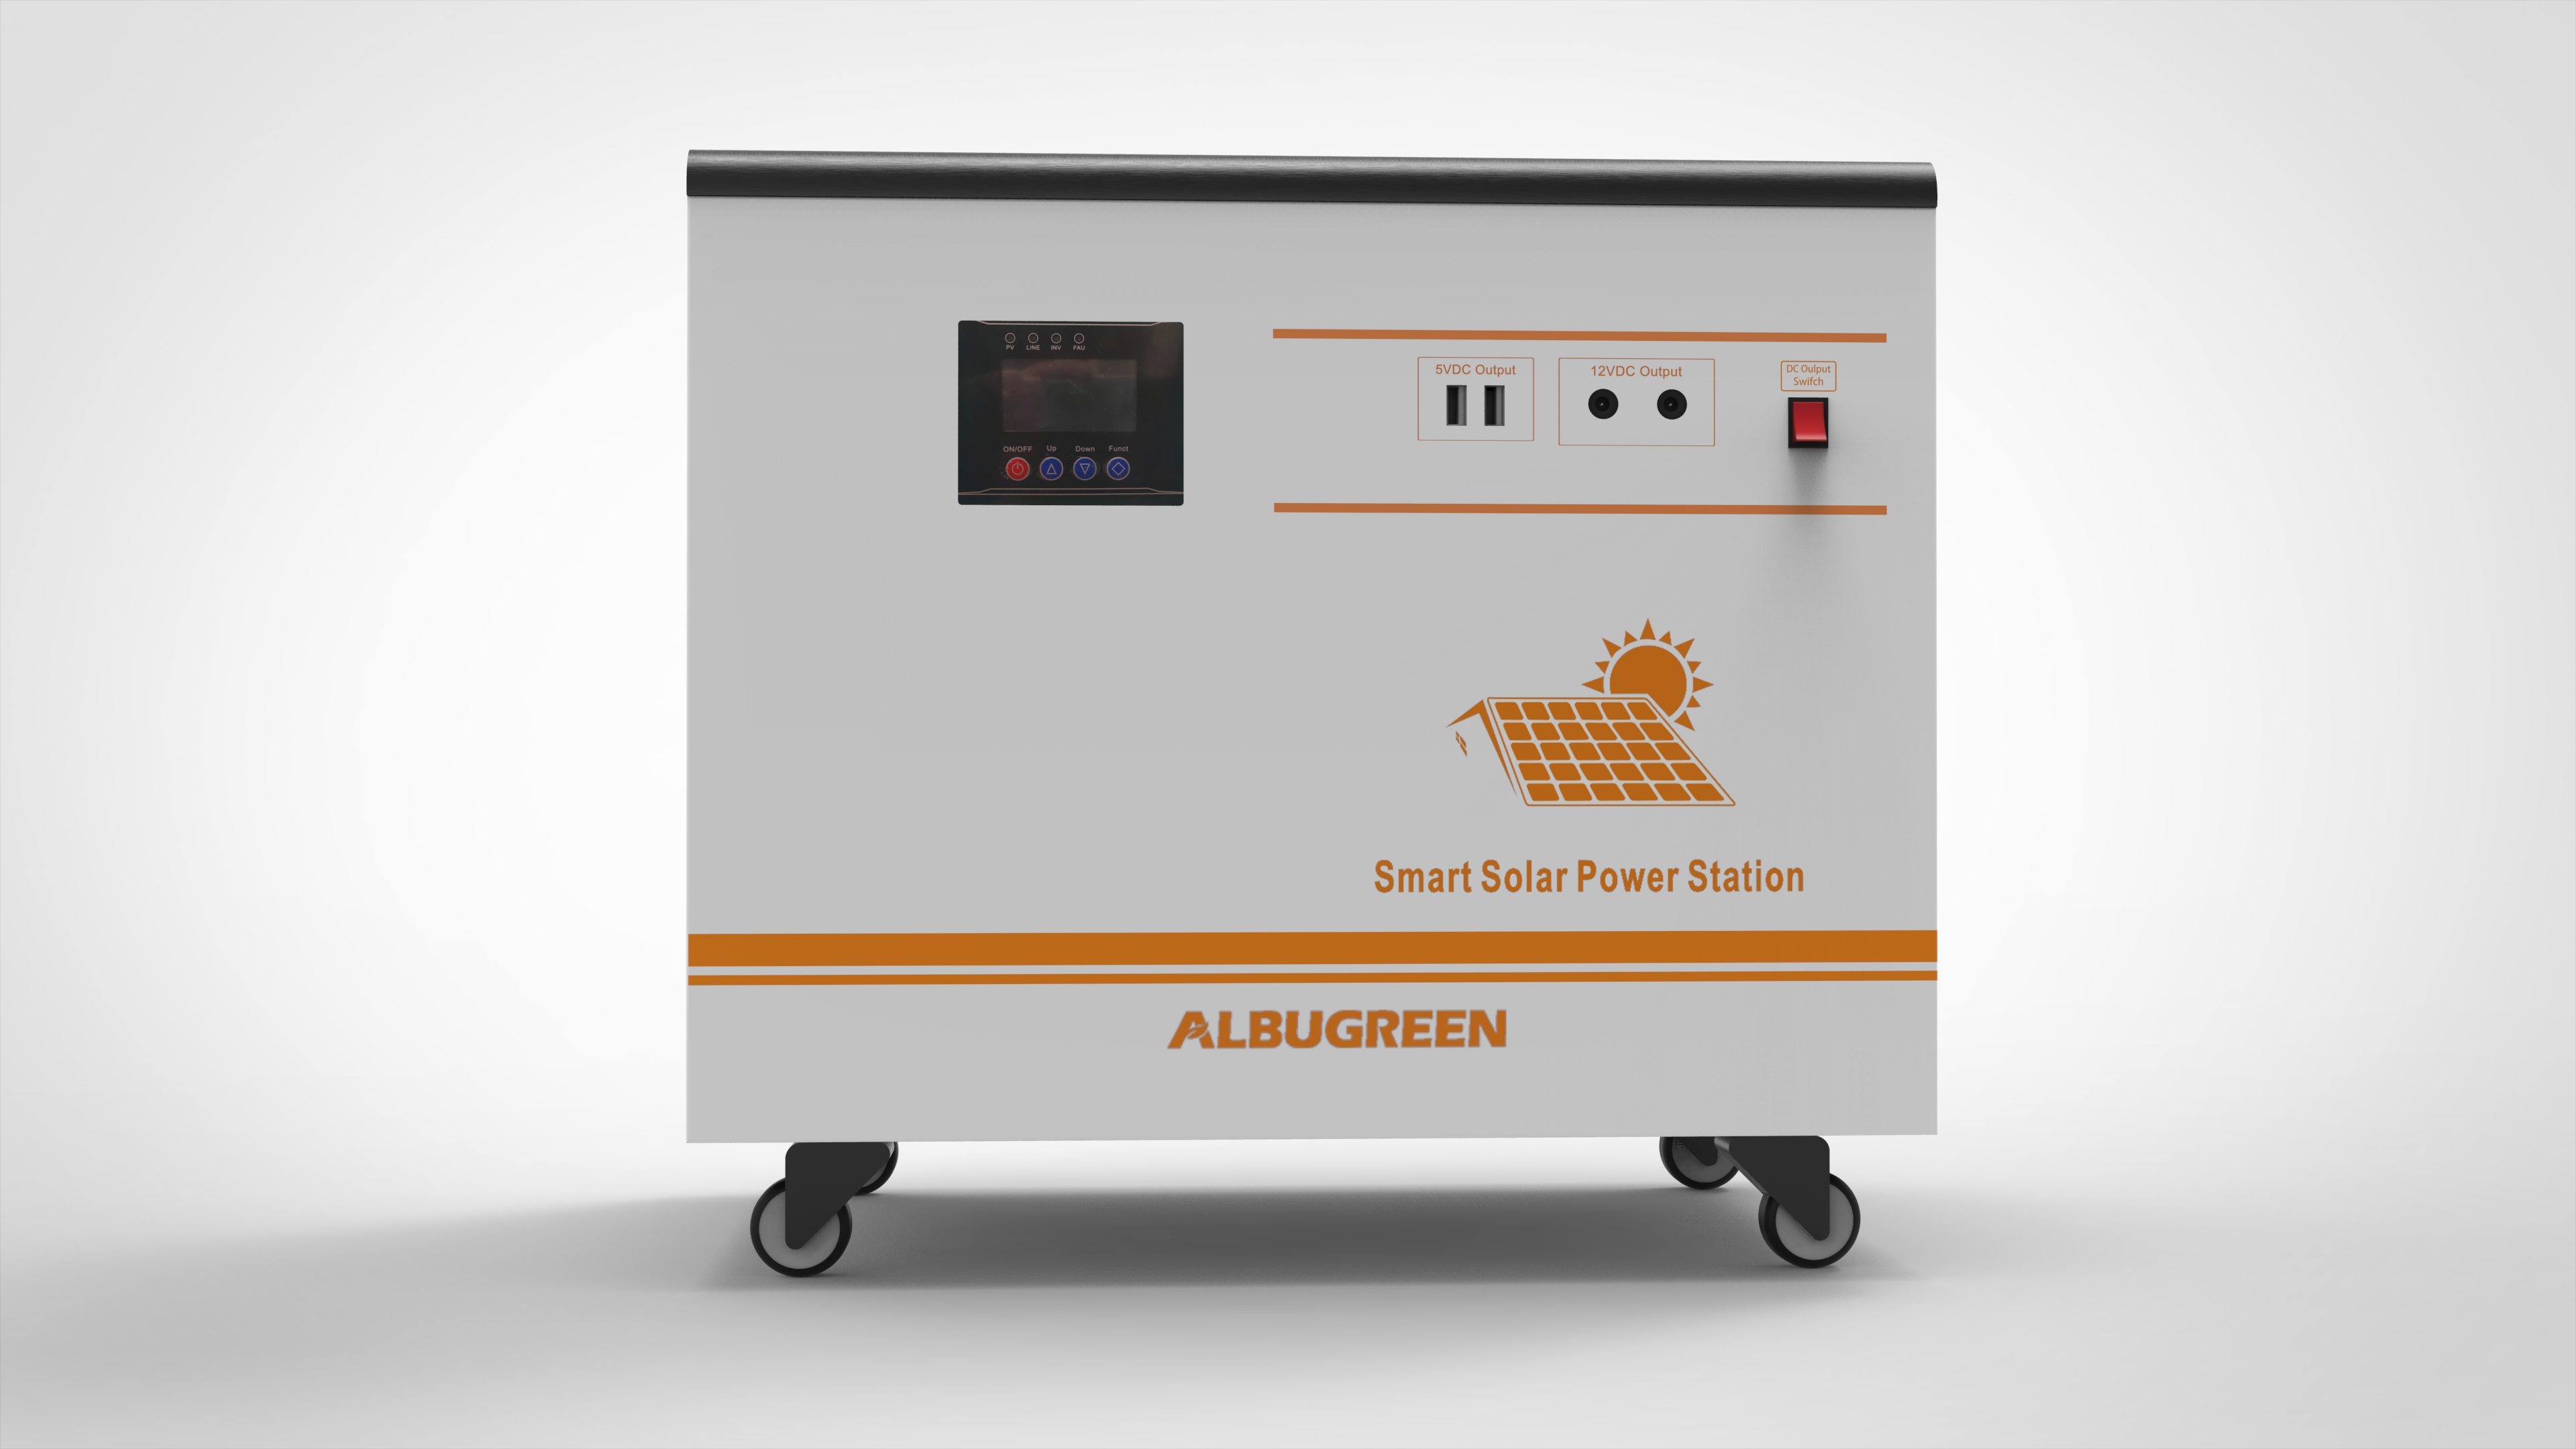 5000w 5000wh 220v High Capacity in One Solar Power System for The Home